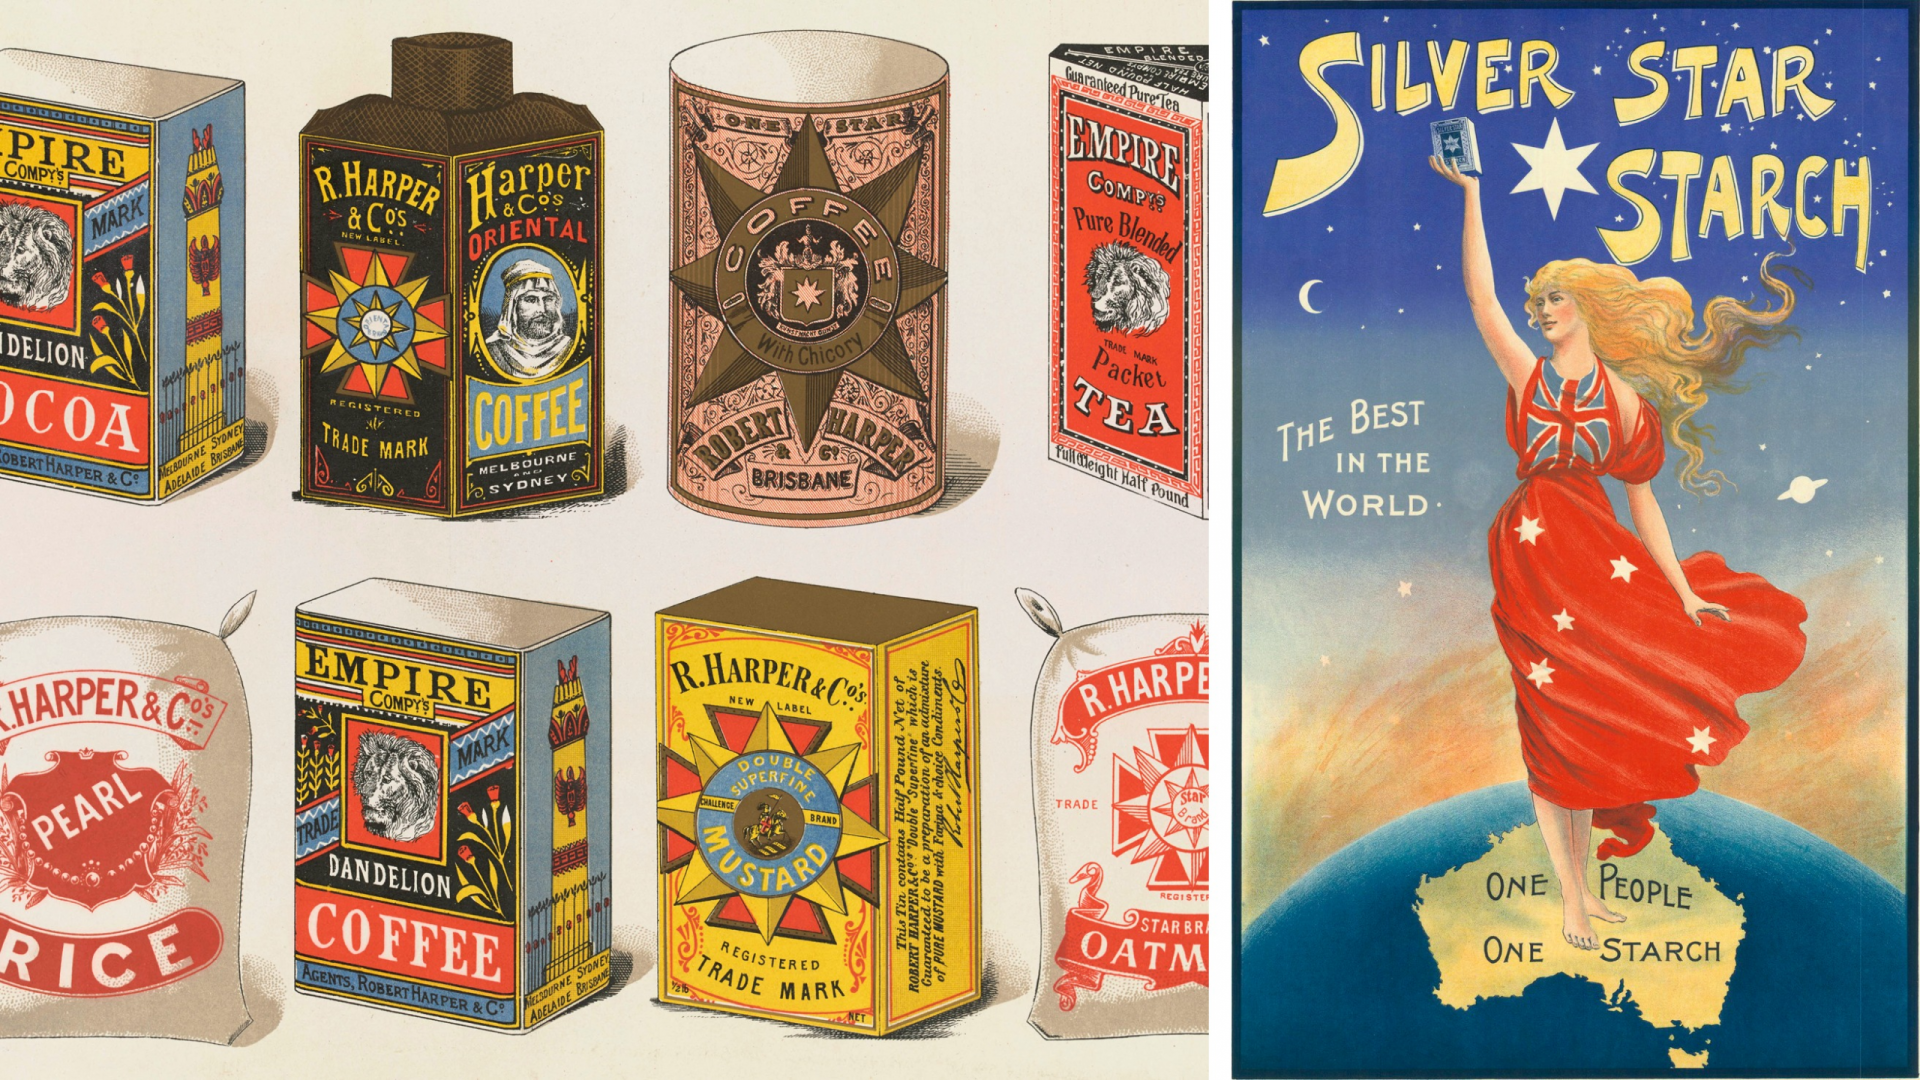 Advertising Illustrations featuring packages of pantry items and a woman